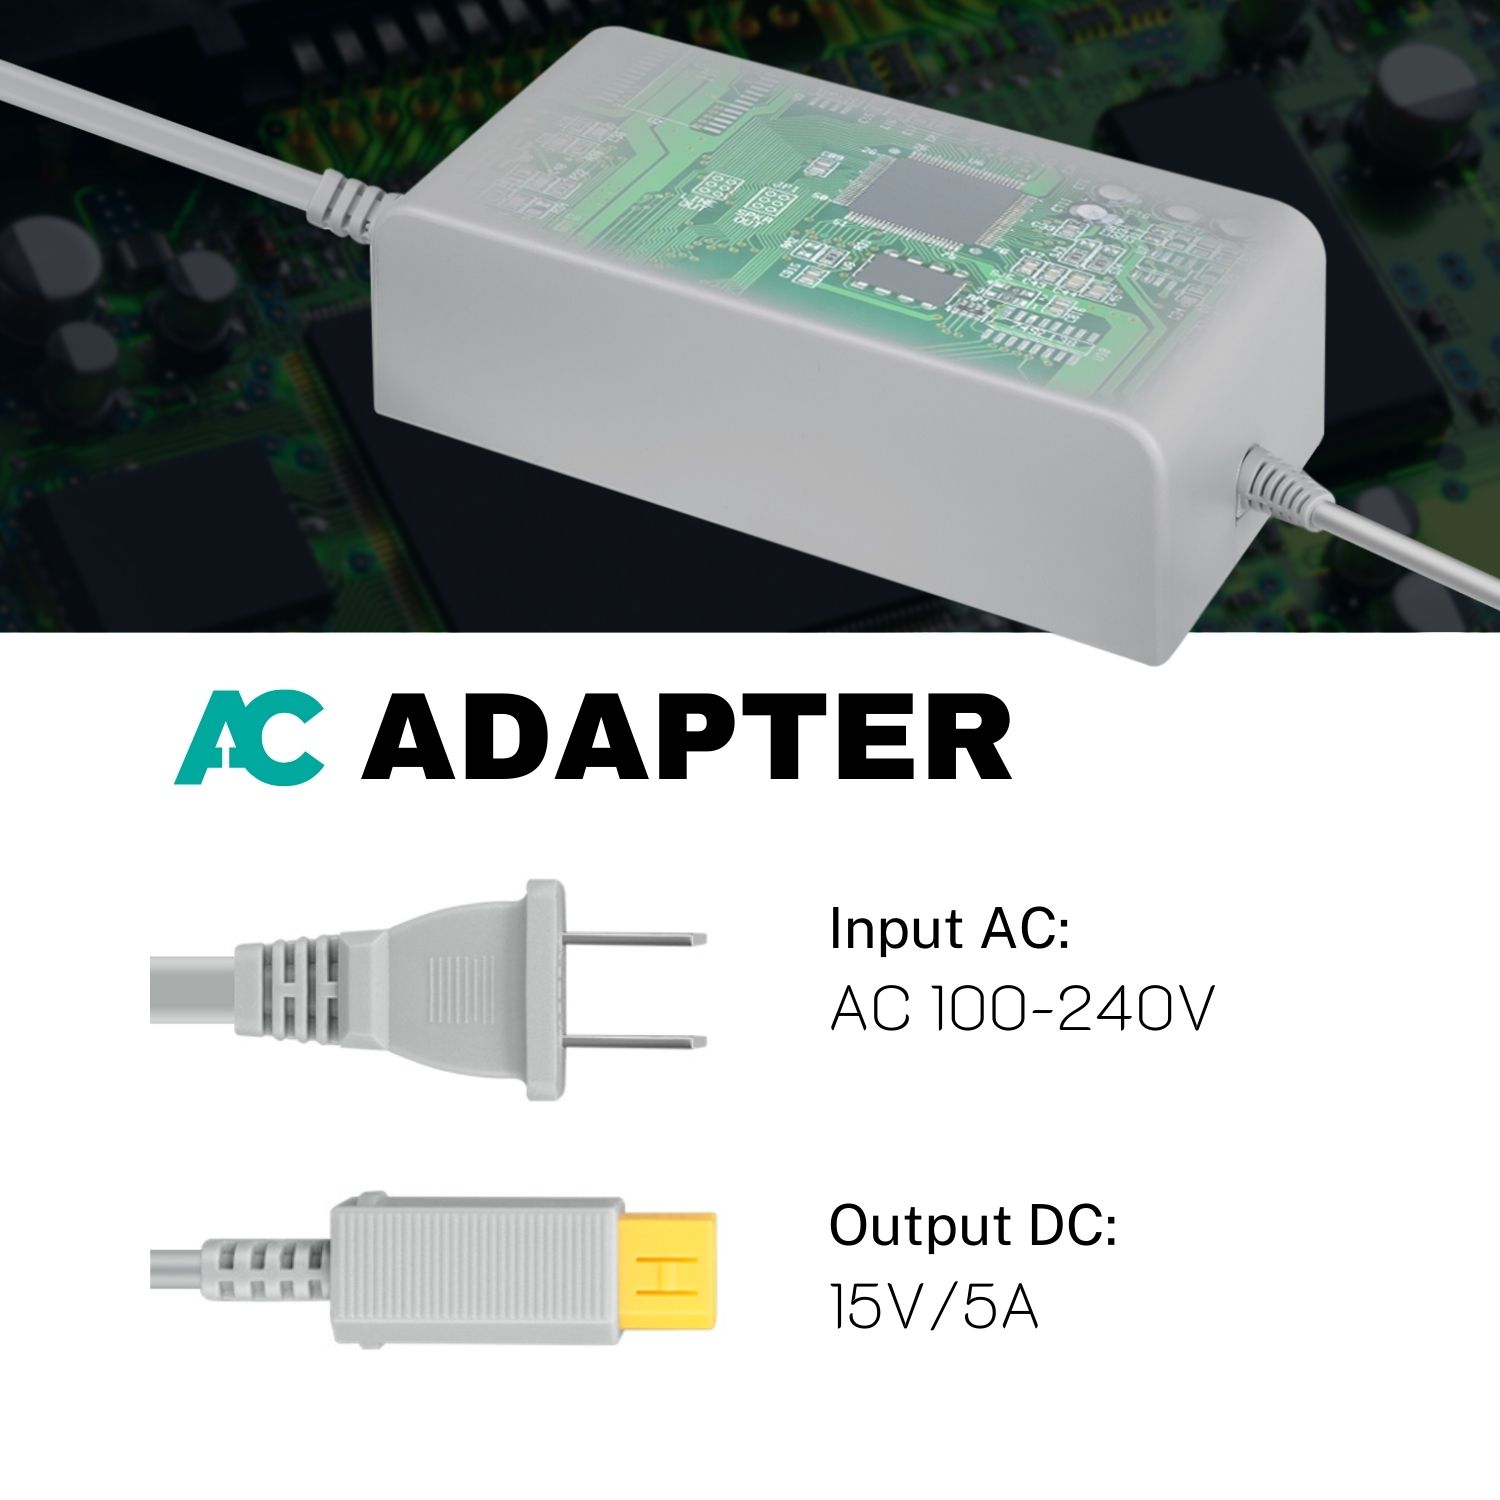 Compatible with Wii U Console - This makes an excellent replacement for your lost, damaged, or faulty power supply AC adapter. Specially made for Wii U console only